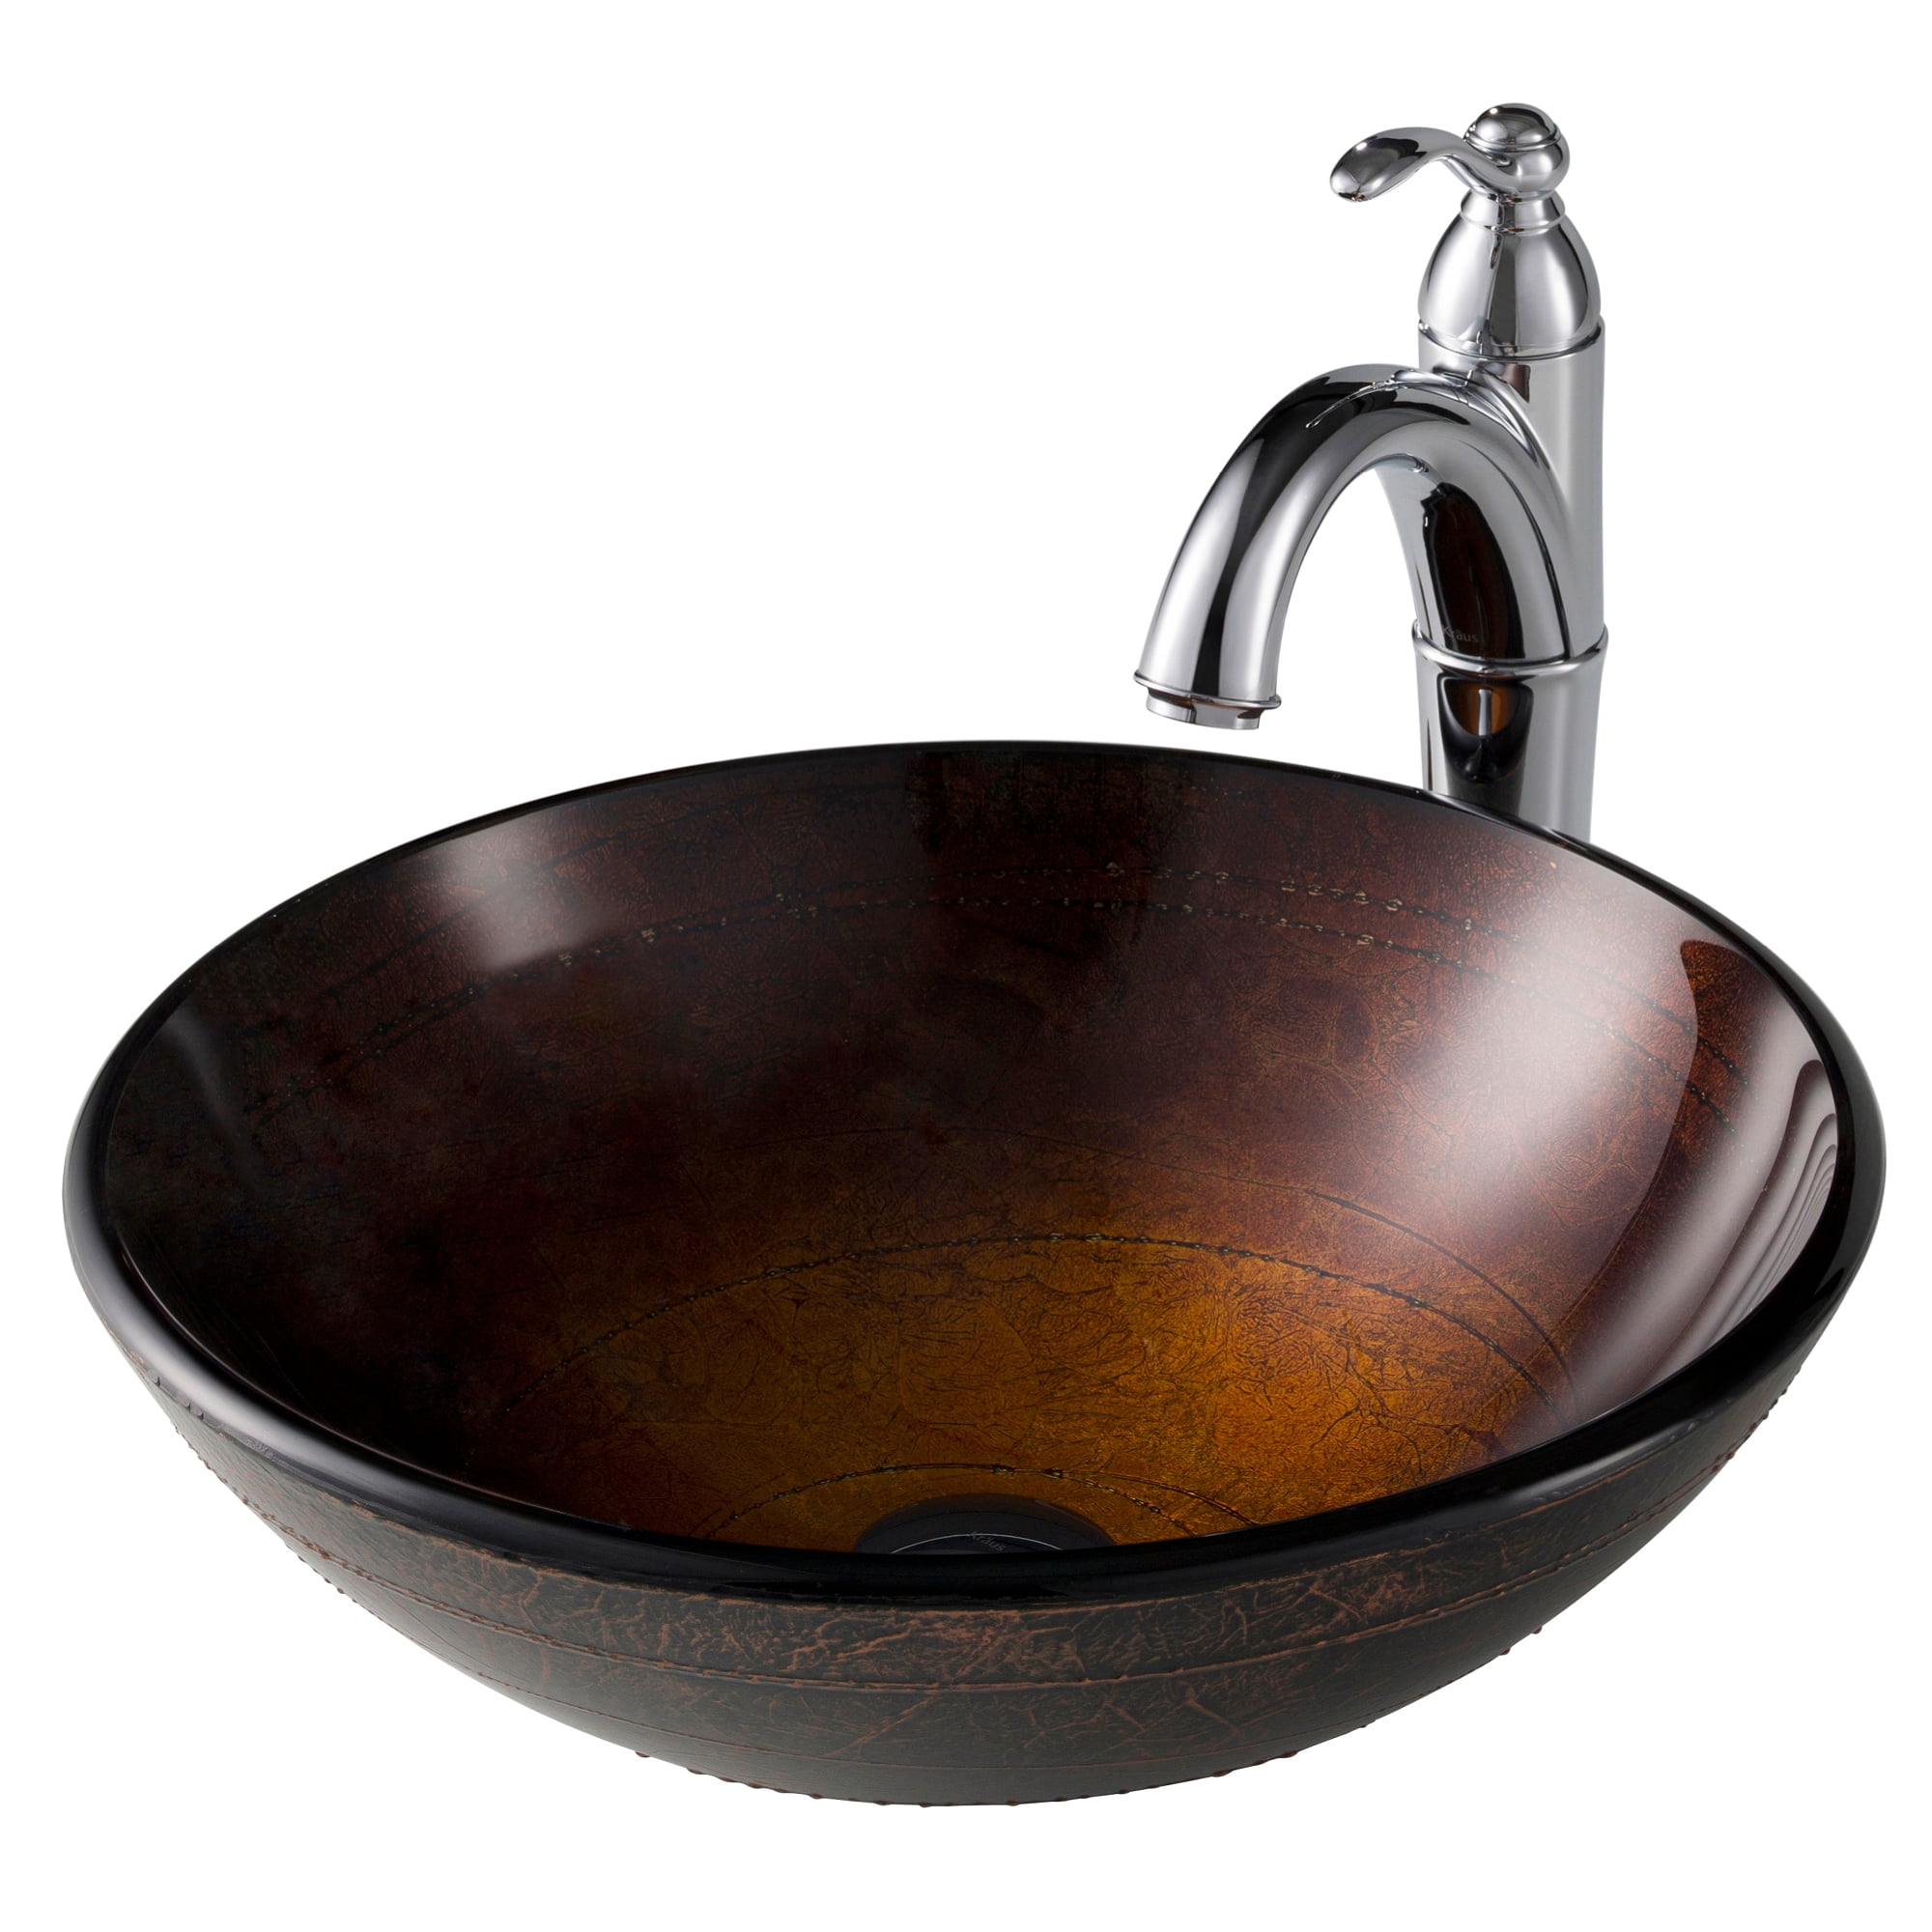 Kraus Copper Brown Glass Bathroom Vessel Sink And Riviera Faucet Combo Set With Pop Up Drain